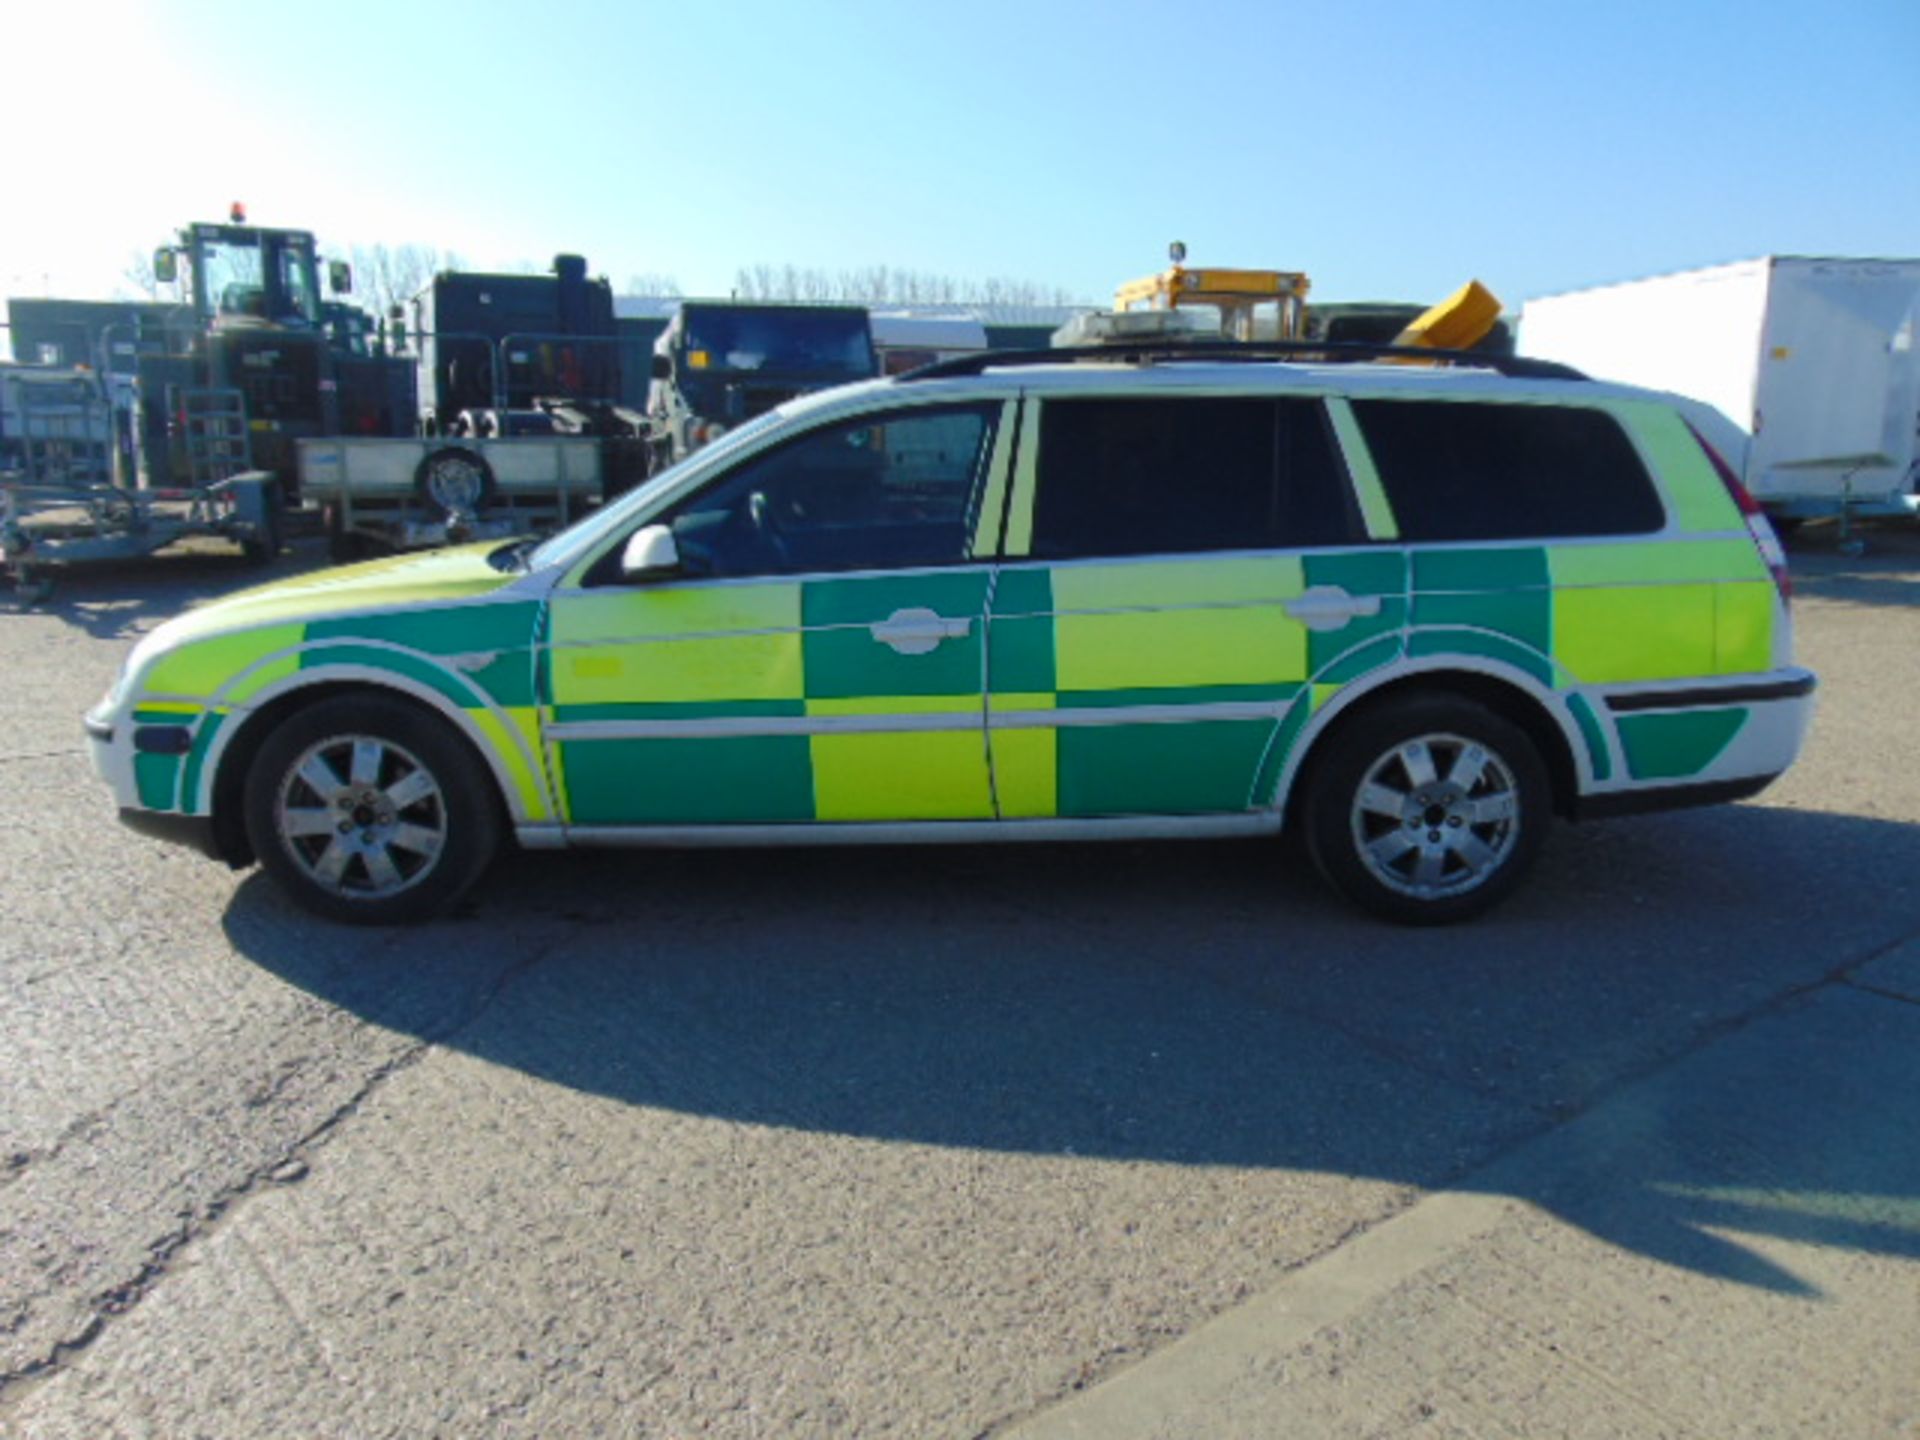 Ford Mondeo 2.0 Turbo diesel ambulance - Image 4 of 14